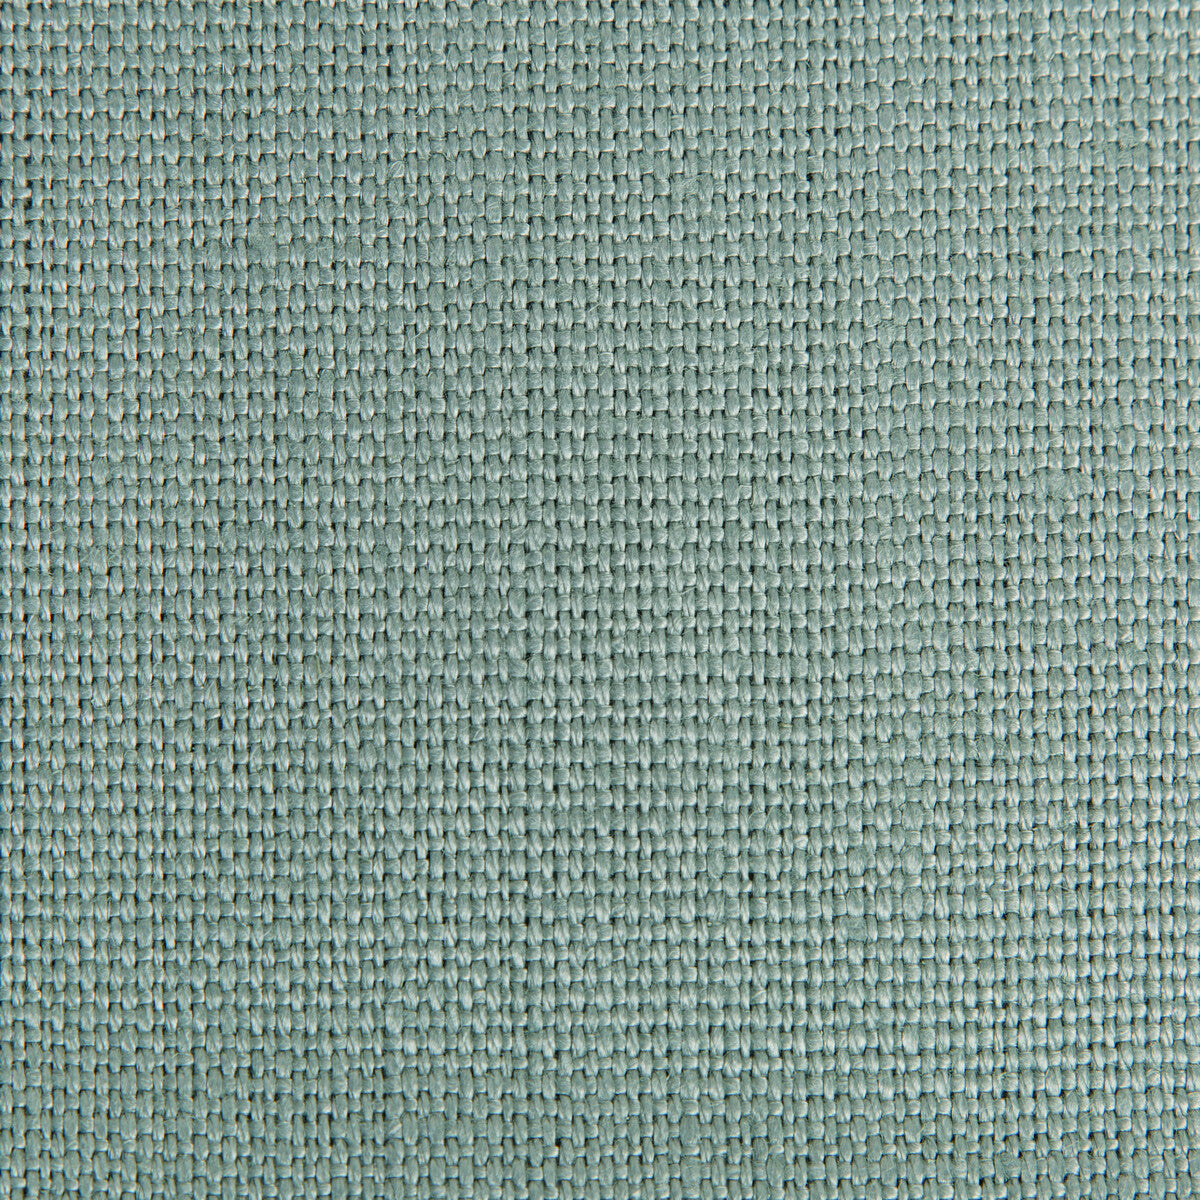 Hampton Linen fabric in mineral color - pattern 2012171.13.0 - by Lee Jofa in the Colour Complements II collection